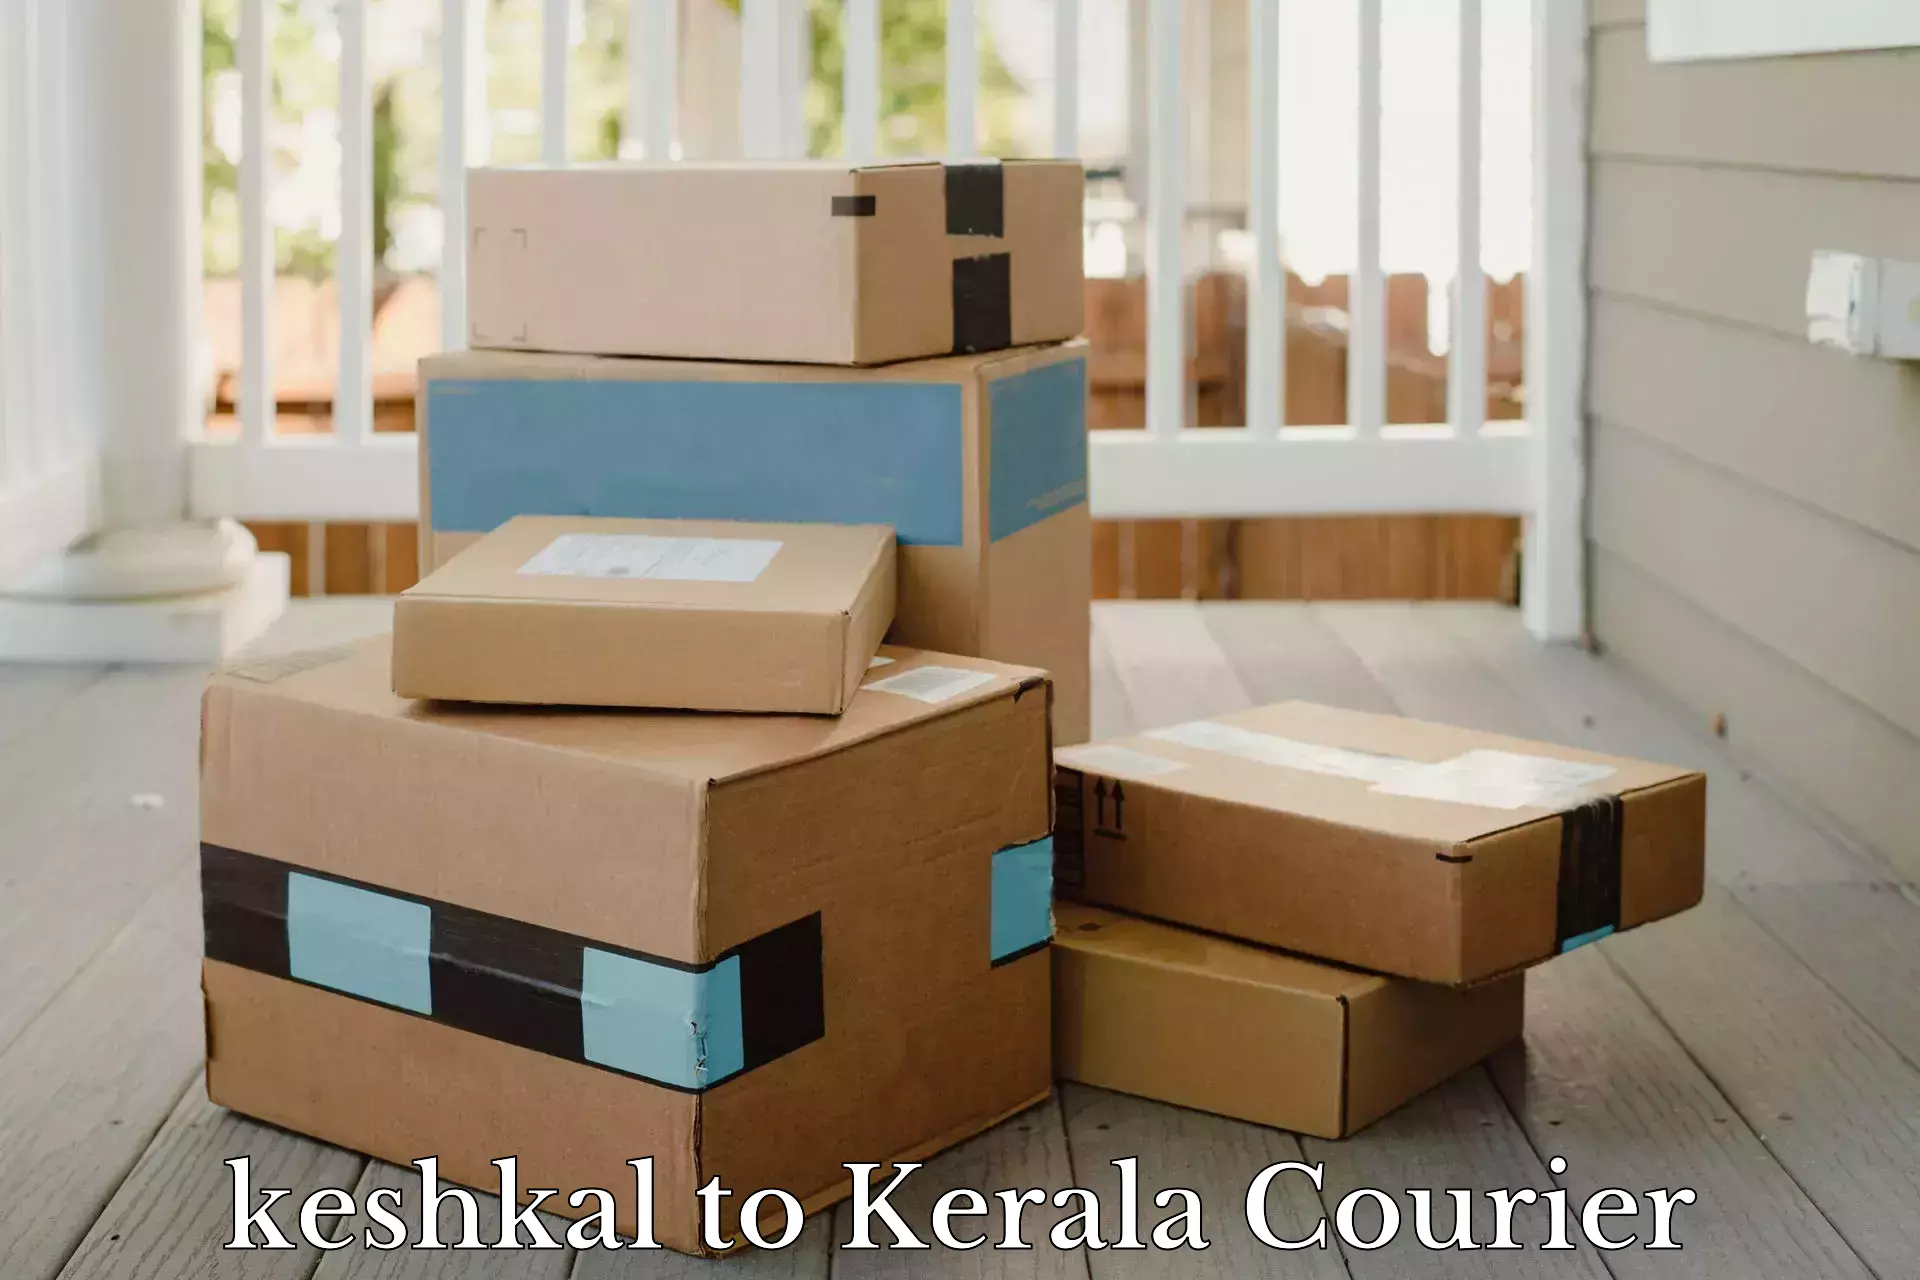 Secure freight services keshkal to Kanhangad